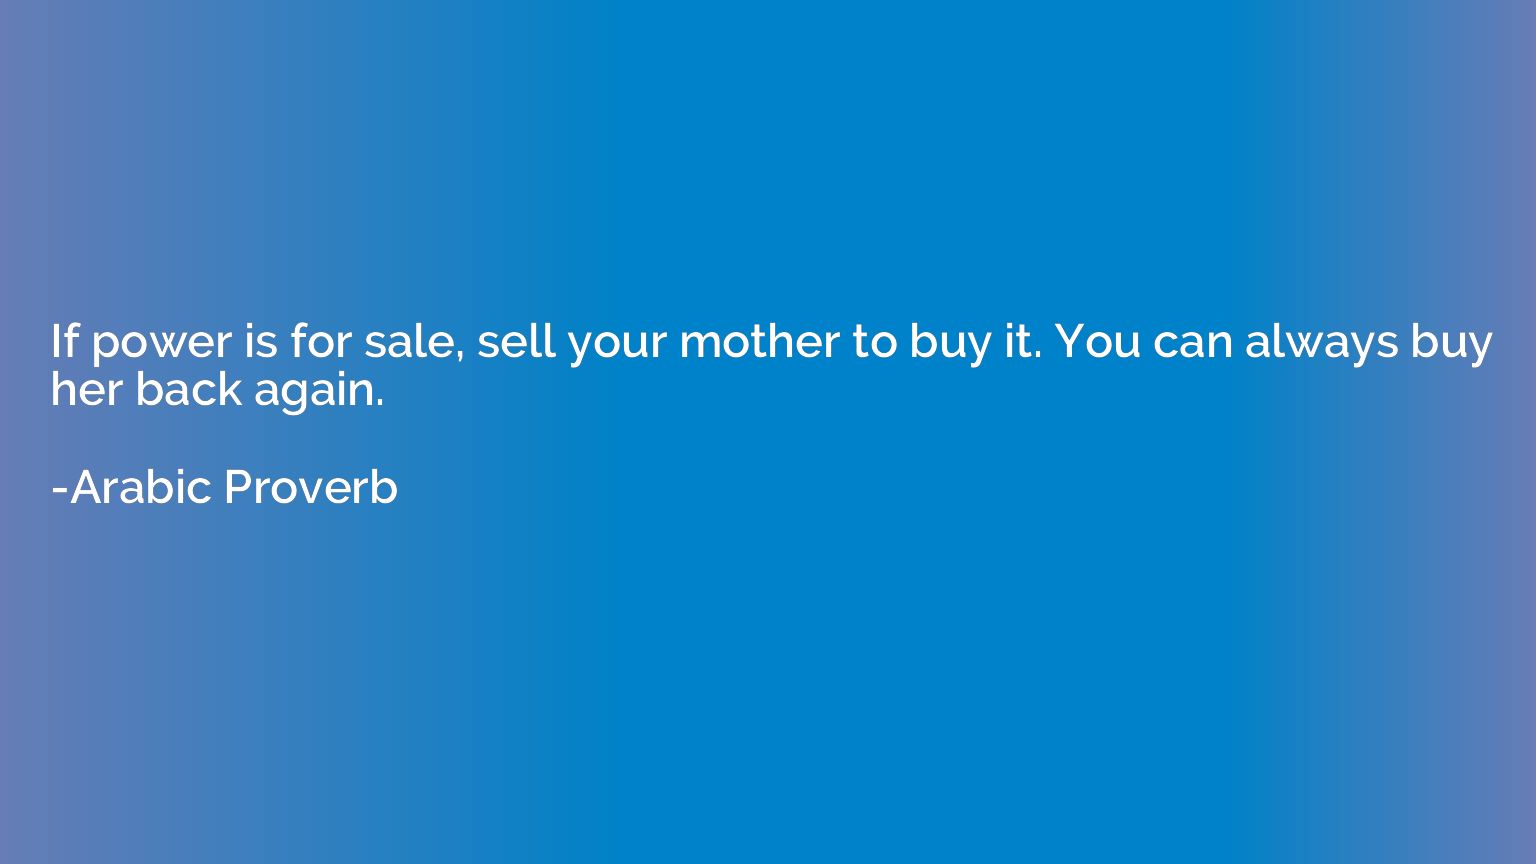 If power is for sale, sell your mother to buy it. You can al